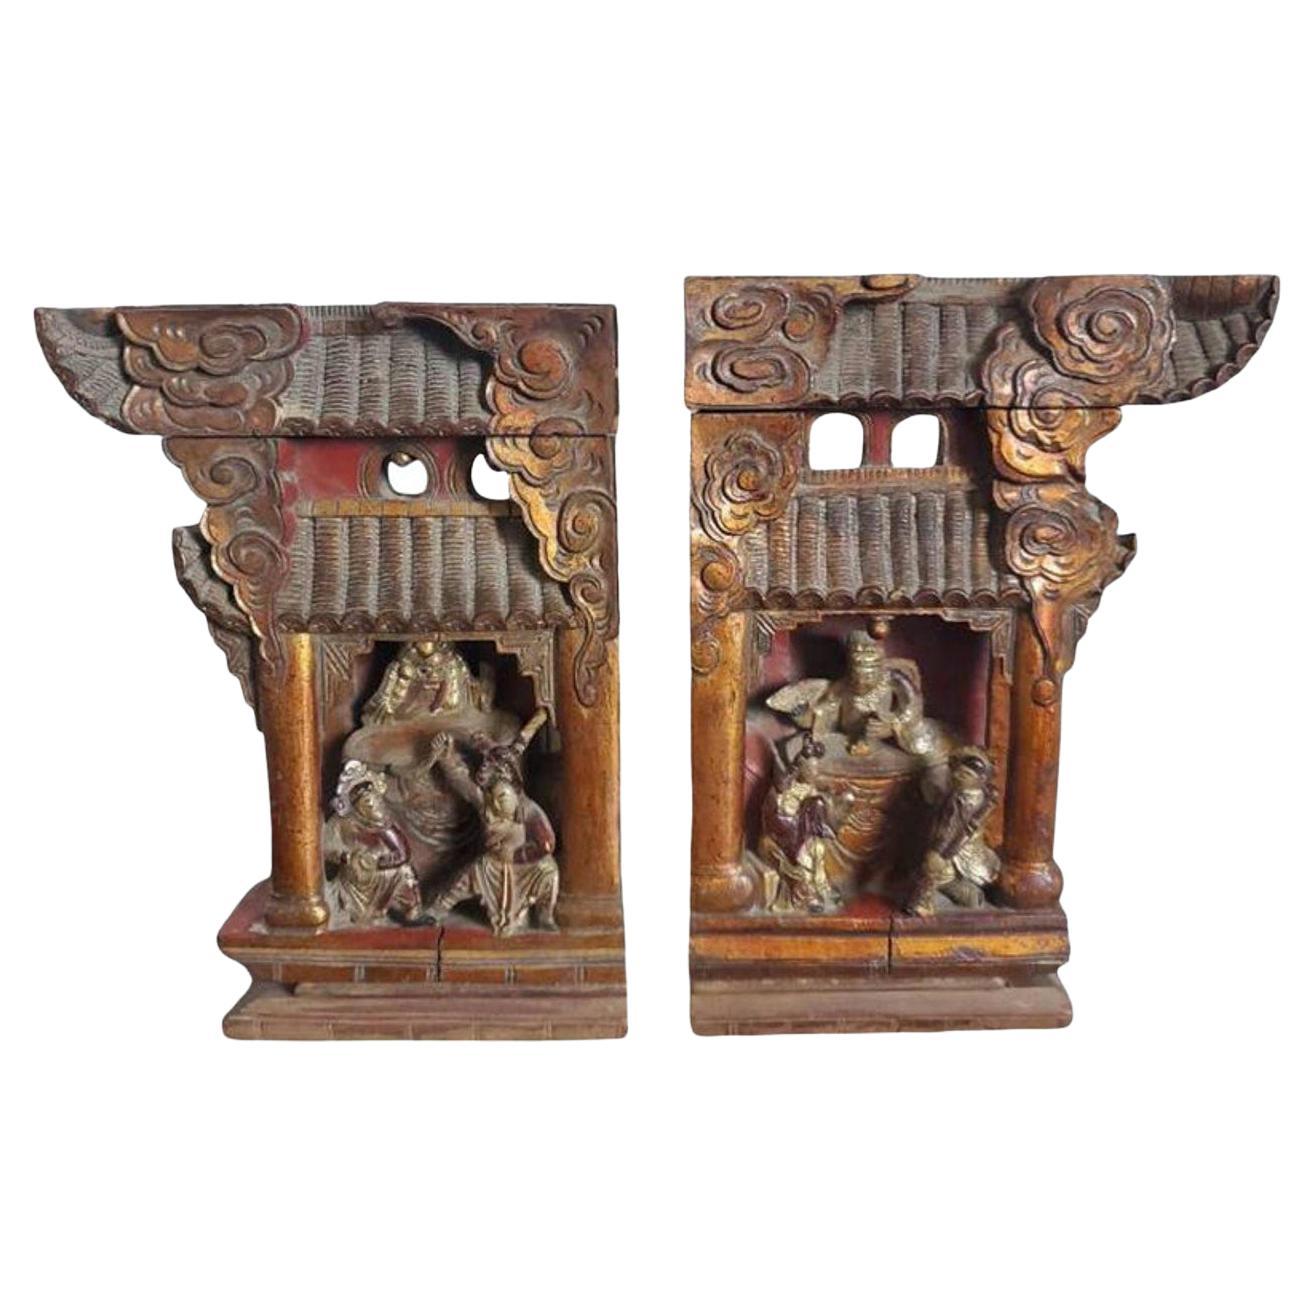 Rare Set of Two Qing Dynasty Chinese Architectural Temple Brackets